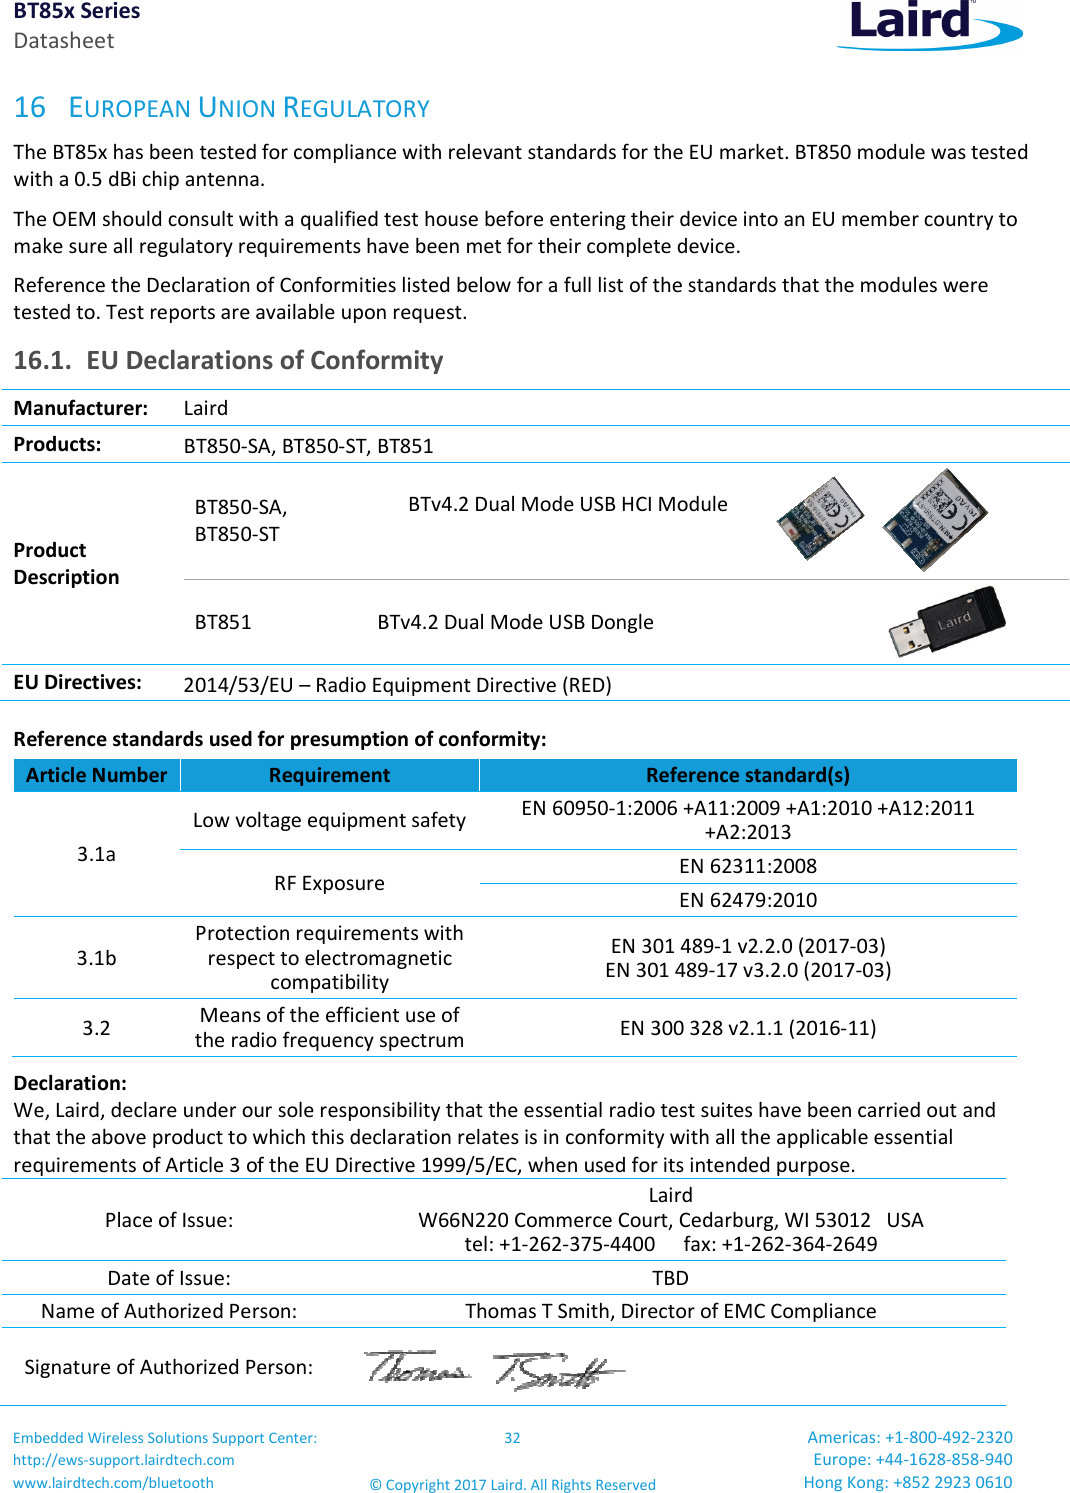 BT85x Series Datasheet Embedded Wireless Solutions Support Center: http://ews-support.lairdtech.com www.lairdtech.com/bluetooth 32 © Copyright 2017 Laird. All Rights Reserved Americas: +1-800-492-2320 Europe: +44-1628-858-940 Hong Kong: +852 2923 0610  16 EUROPEAN UNION REGULATORY The BT85x has been tested for compliance with relevant standards for the EU market. BT850 module was tested with a 0.5 dBi chip antenna. The OEM should consult with a qualified test house before entering their device into an EU member country to make sure all regulatory requirements have been met for their complete device. Reference the Declaration of Conformities listed below for a full list of the standards that the modules were tested to. Test reports are available upon request. 16.1. EU Declarations of Conformity Manufacturer: Laird  Products:  BT850-SA, BT850-ST, BT851 Product  Description BT850-SA, BT850-ST  BTv4.2 Dual Mode USB HCI Module  BT851  BTv4.2 Dual Mode USB Dongle   EU Directives:  2014/53/EU – Radio Equipment Directive (RED) Reference standards used for presumption of conformity:  Article Number Requirement  Reference standard(s) 3.1a Low voltage equipment safety EN 60950-1:2006 +A11:2009 +A1:2010 +A12:2011 +A2:2013 RF Exposure  EN 62311:2008 EN 62479:2010 3.1b Protection requirements with respect to electromagnetic compatibility EN 301 489-1 v2.2.0 (2017-03) EN 301 489-17 v3.2.0 (2017-03) 3.2  Means of the efficient use of the radio frequency spectrum EN 300 328 v2.1.1 (2016-11) Declaration: We, Laird, declare under our sole responsibility that the essential radio test suites have been carried out and that the above product to which this declaration relates is in conformity with all the applicable essential requirements of Article 3 of the EU Directive 1999/5/EC, when used for its intended purpose. Place of Issue: Laird  W66N220 Commerce Court, Cedarburg, WI 53012   USA tel: +1-262-375-4400  fax: +1-262-364-2649 Date of Issue:  TBD Name of Authorized Person:  Thomas T Smith, Director of EMC Compliance Signature of Authorized Person:  